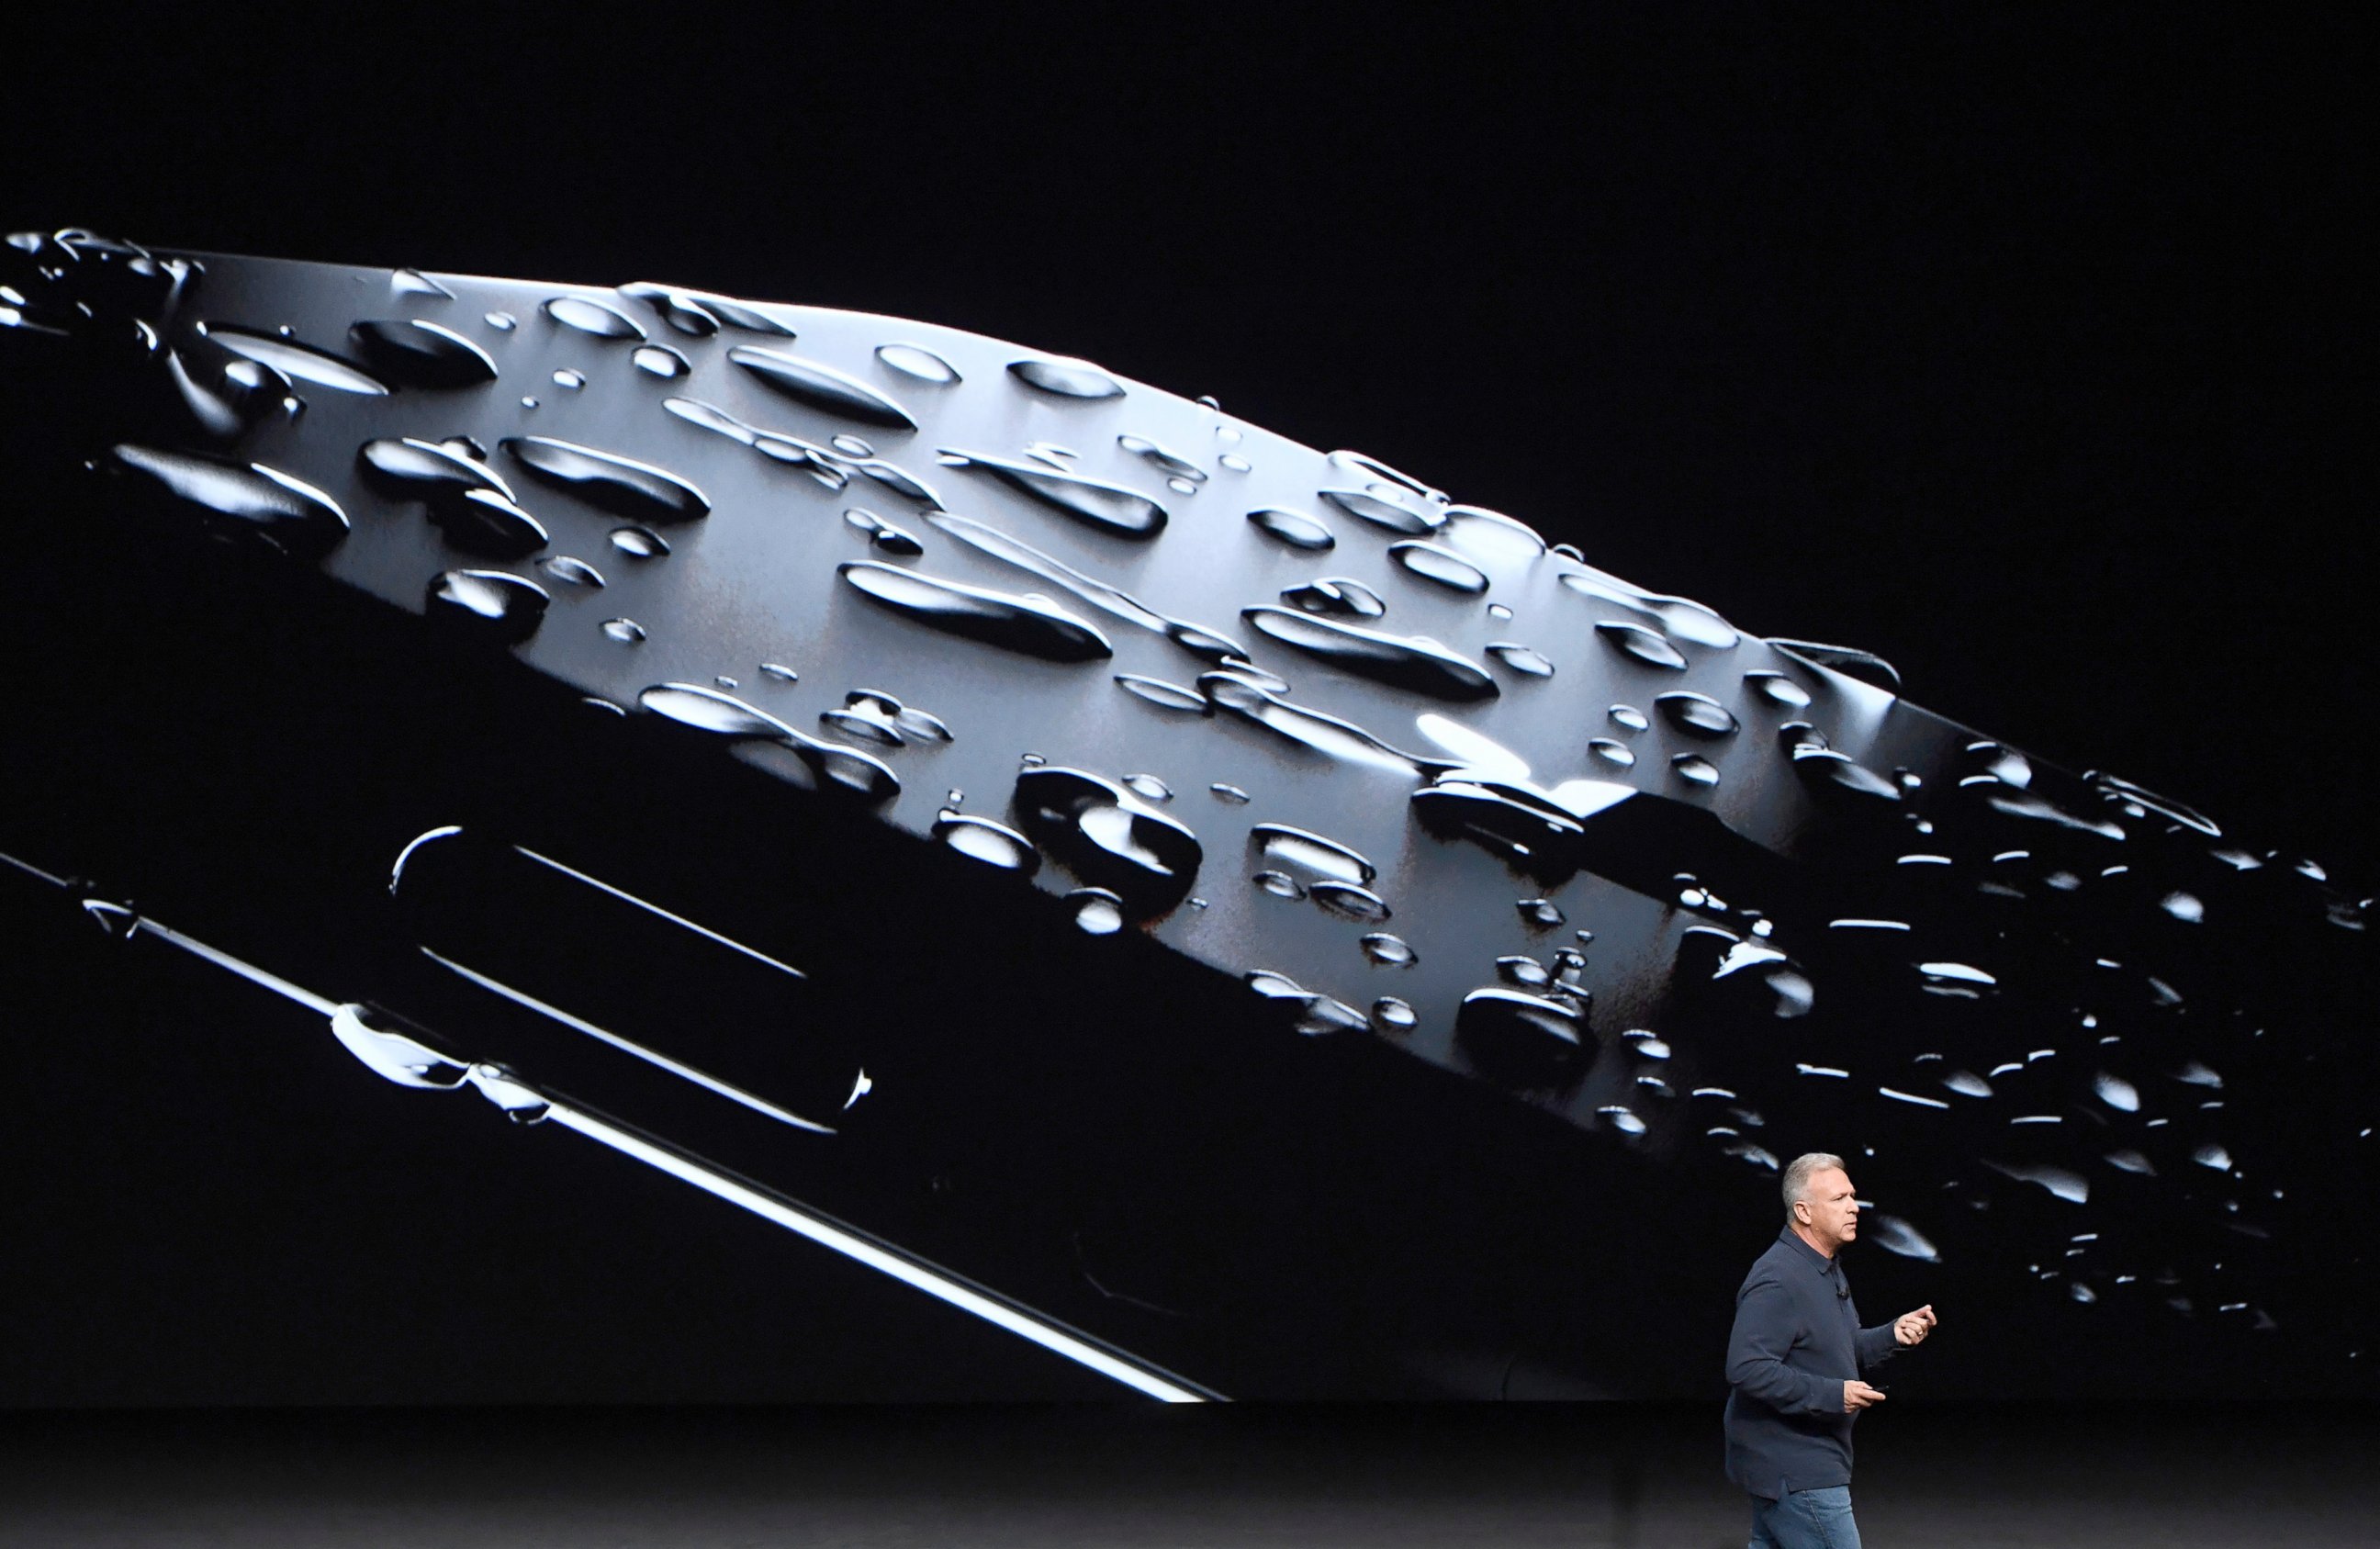 PHOTO: Philip "Phil" Schiller, senior vice president of worldwide marketing at Apple Inc., unveils the new iPhone 7 during an event in San Francisco, Sept. 7, 2016. 